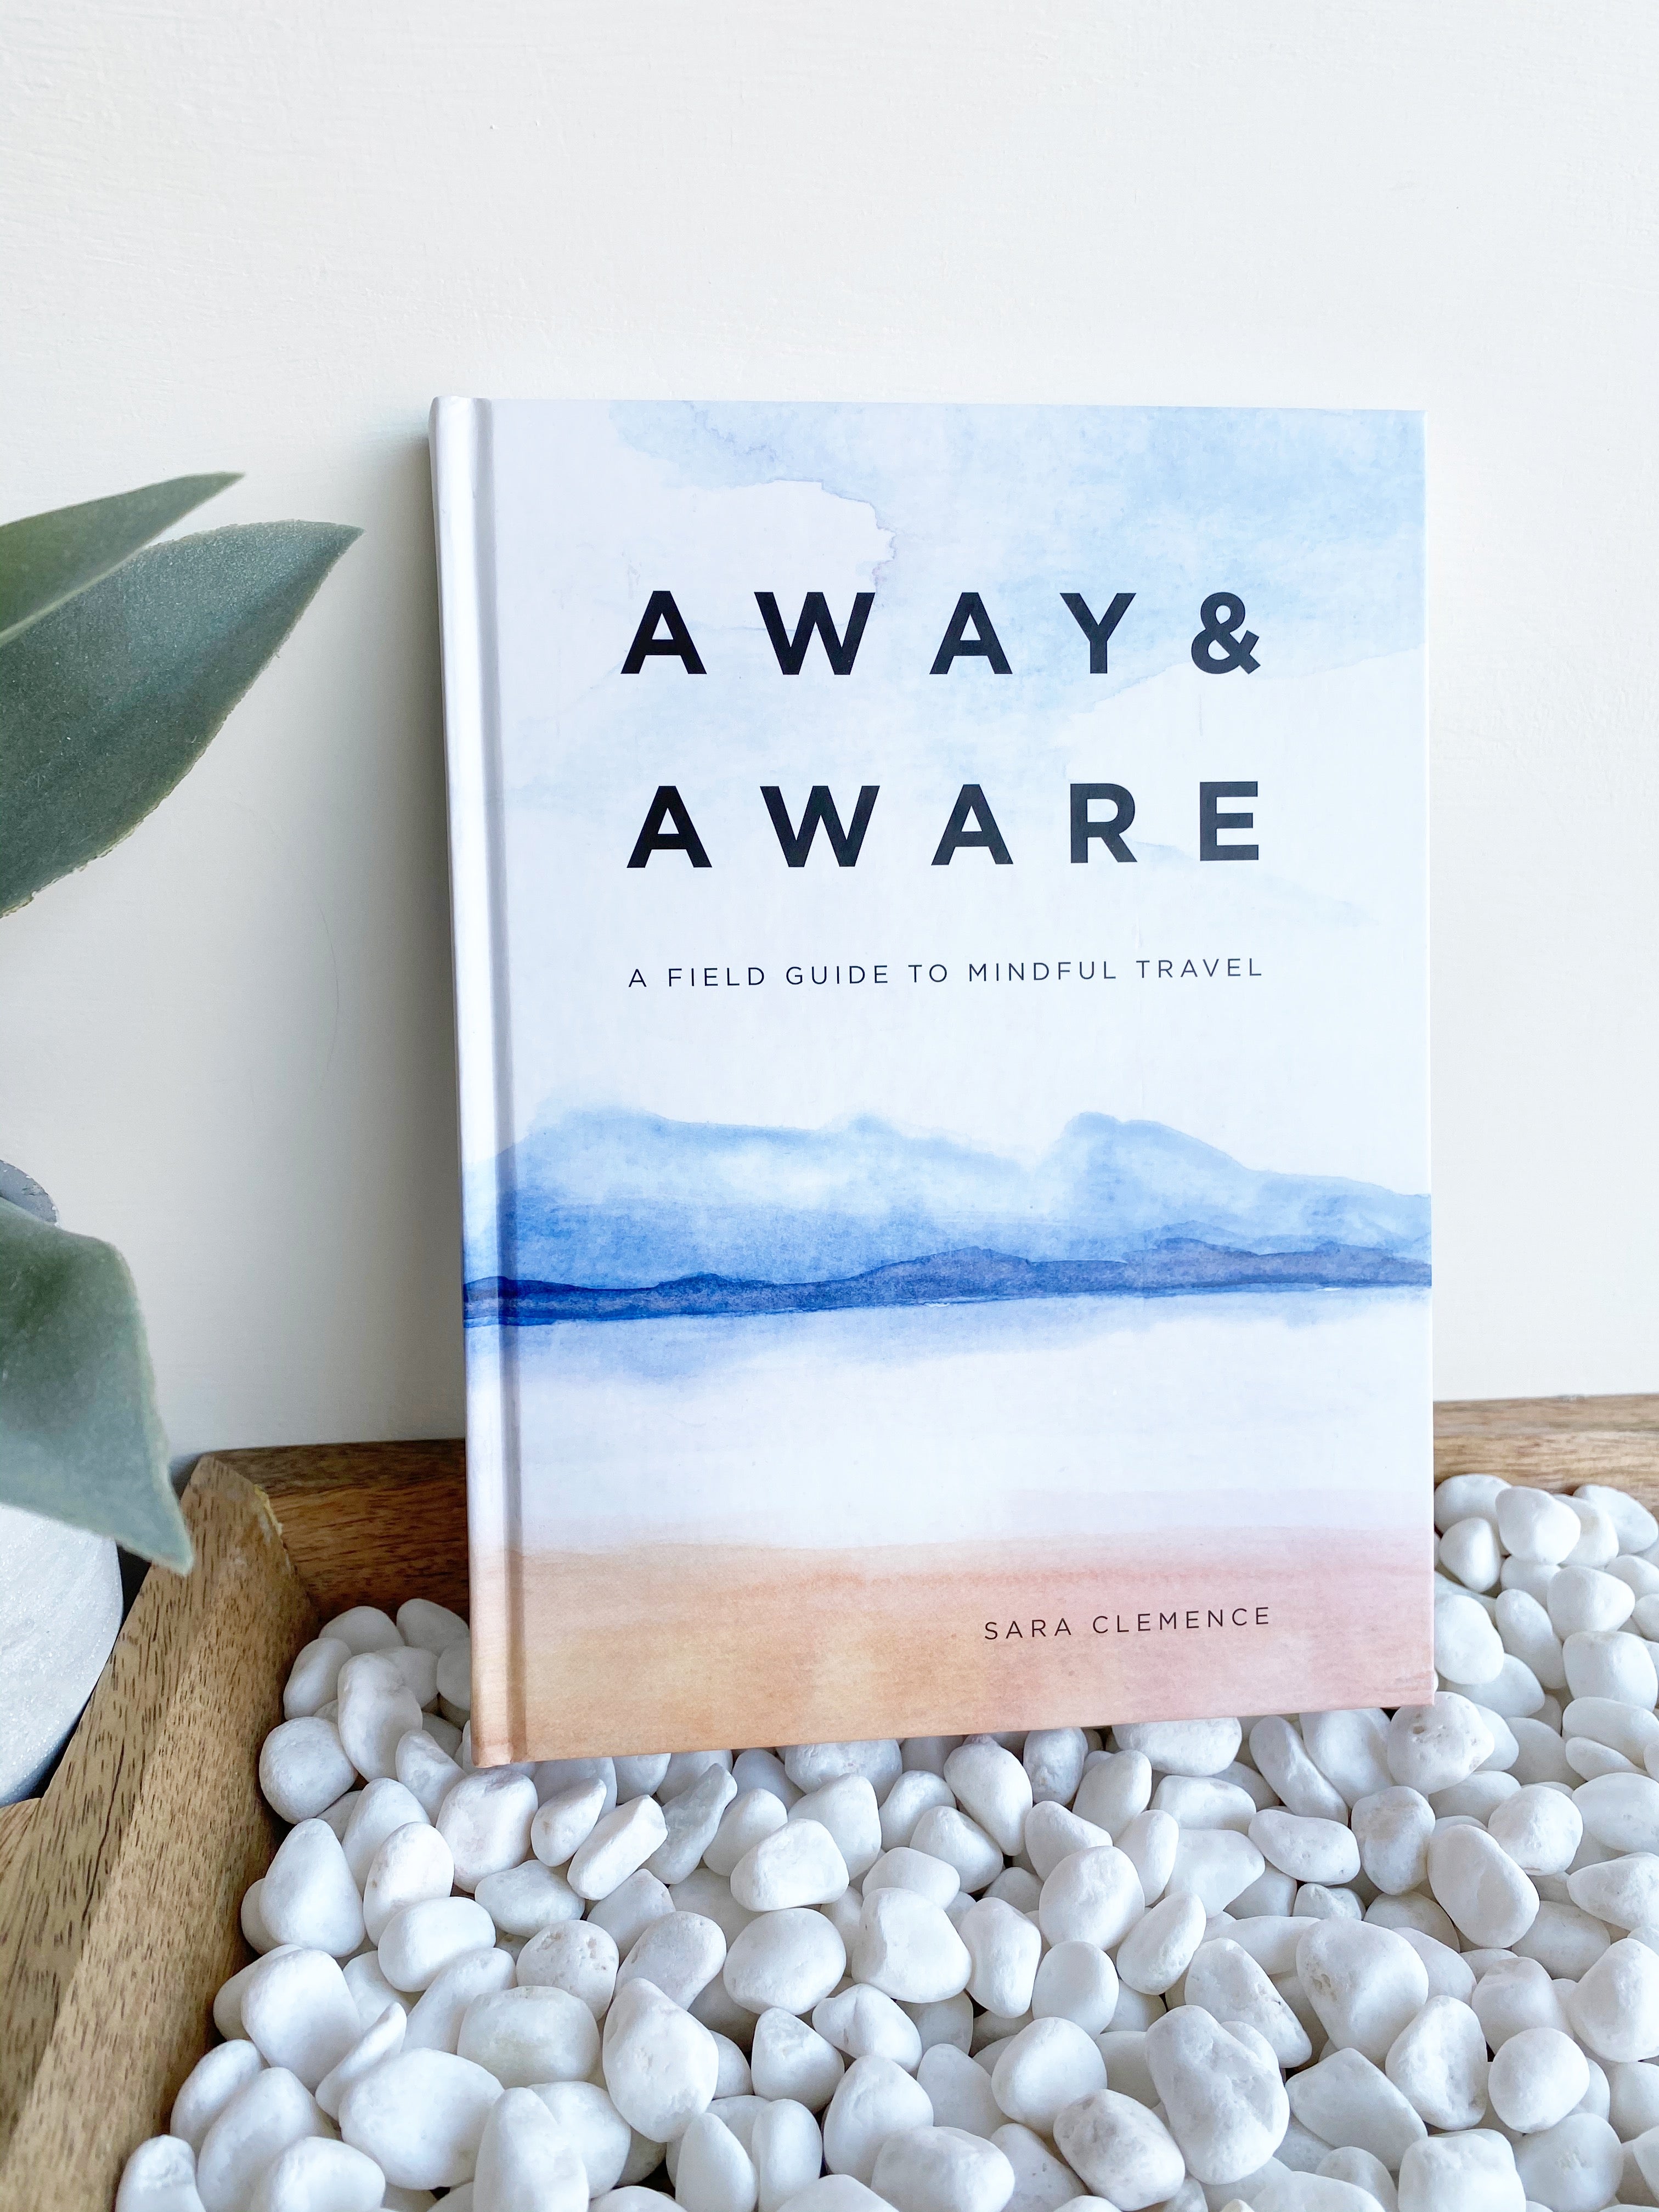 The hardcover book sits upright against a white wall, sitting atop a wooden tray filled with white pebbles. There is a green plant peeking over the left side. The book cover features an abstract scene that resembles blue skies, dark blue water, and sandy beach. In bold black text, the title Away & Aware is printed with description and author text below.